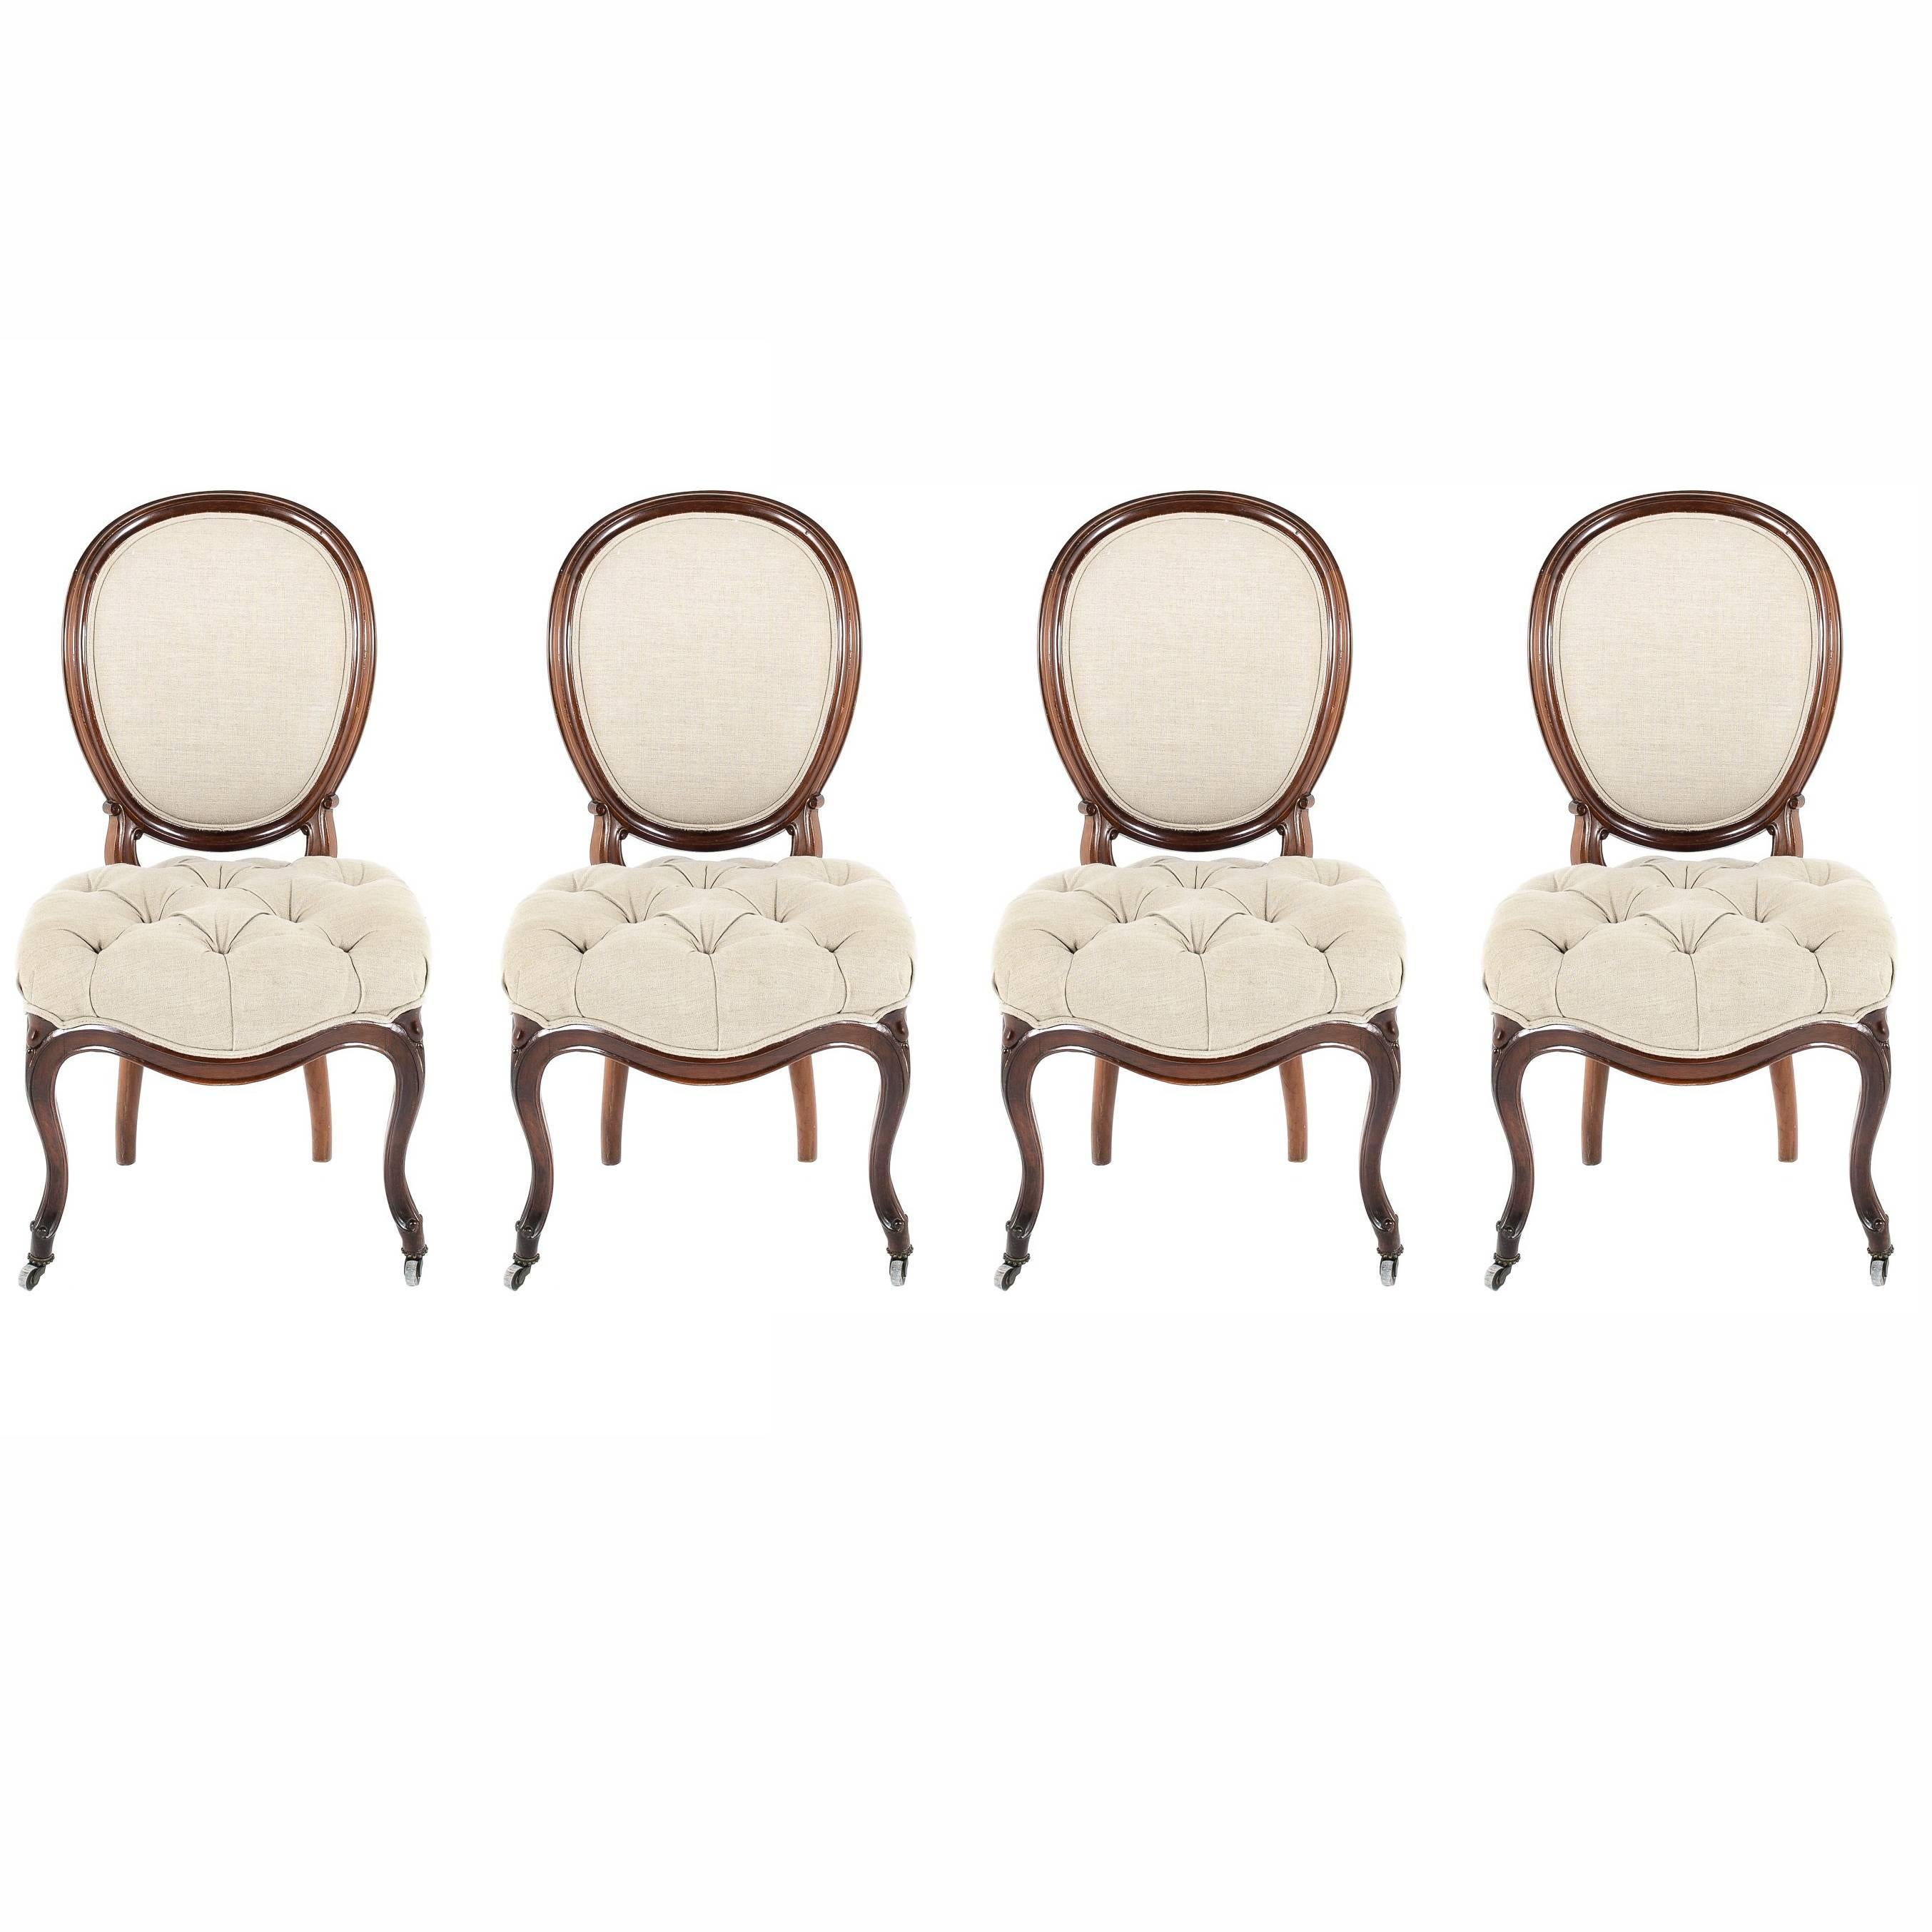 Four Antique Rosewood Dining Chairs, circa 1880